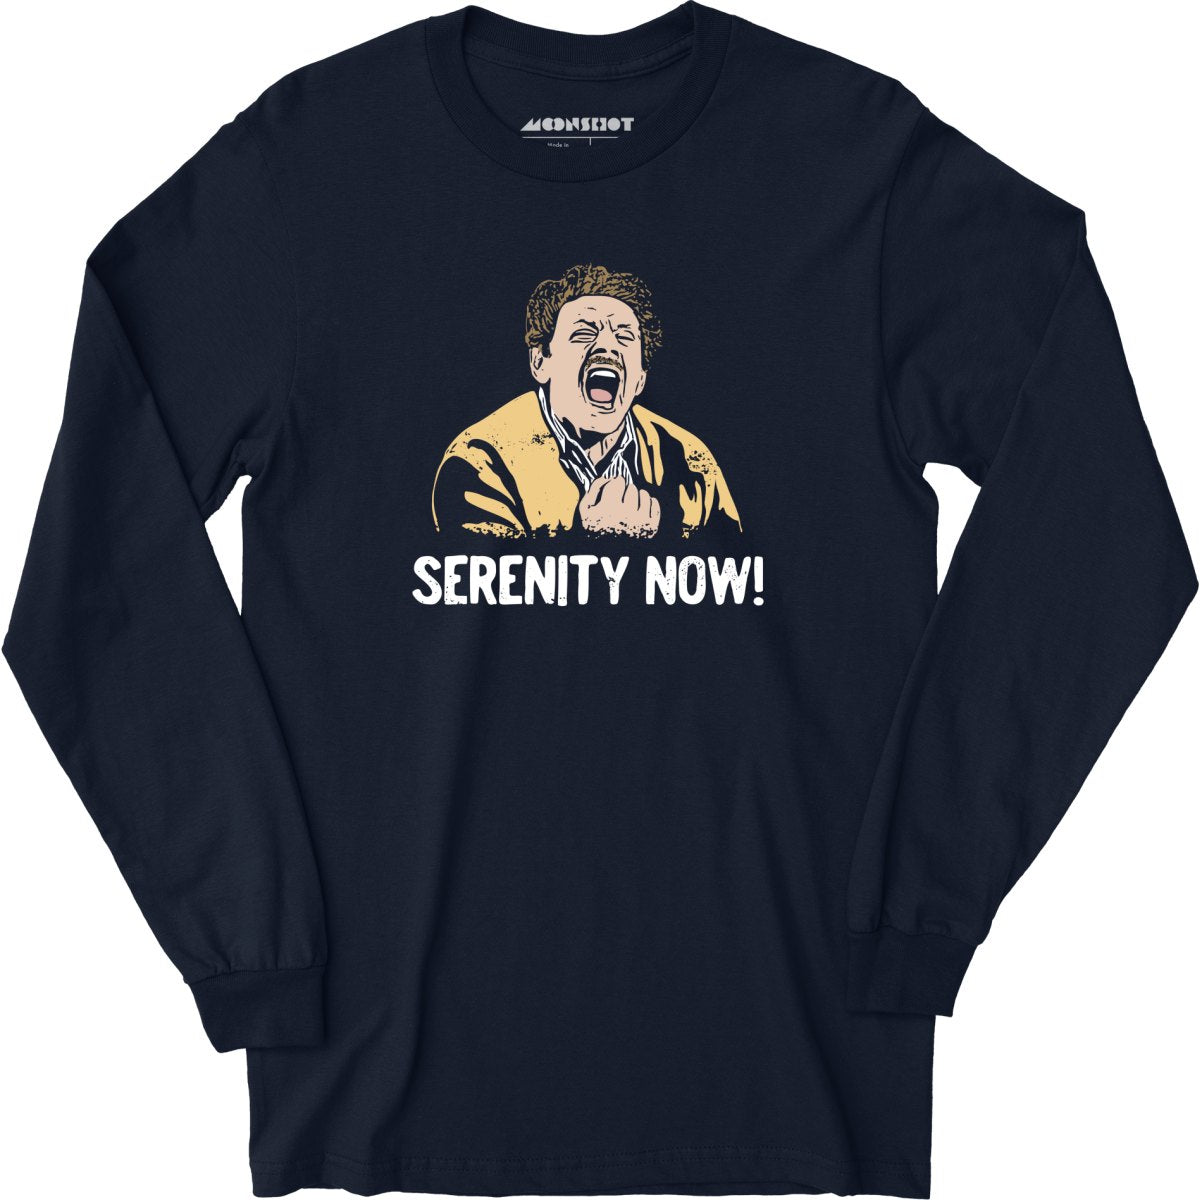 Serenity Now! - Long Sleeve T-Shirt